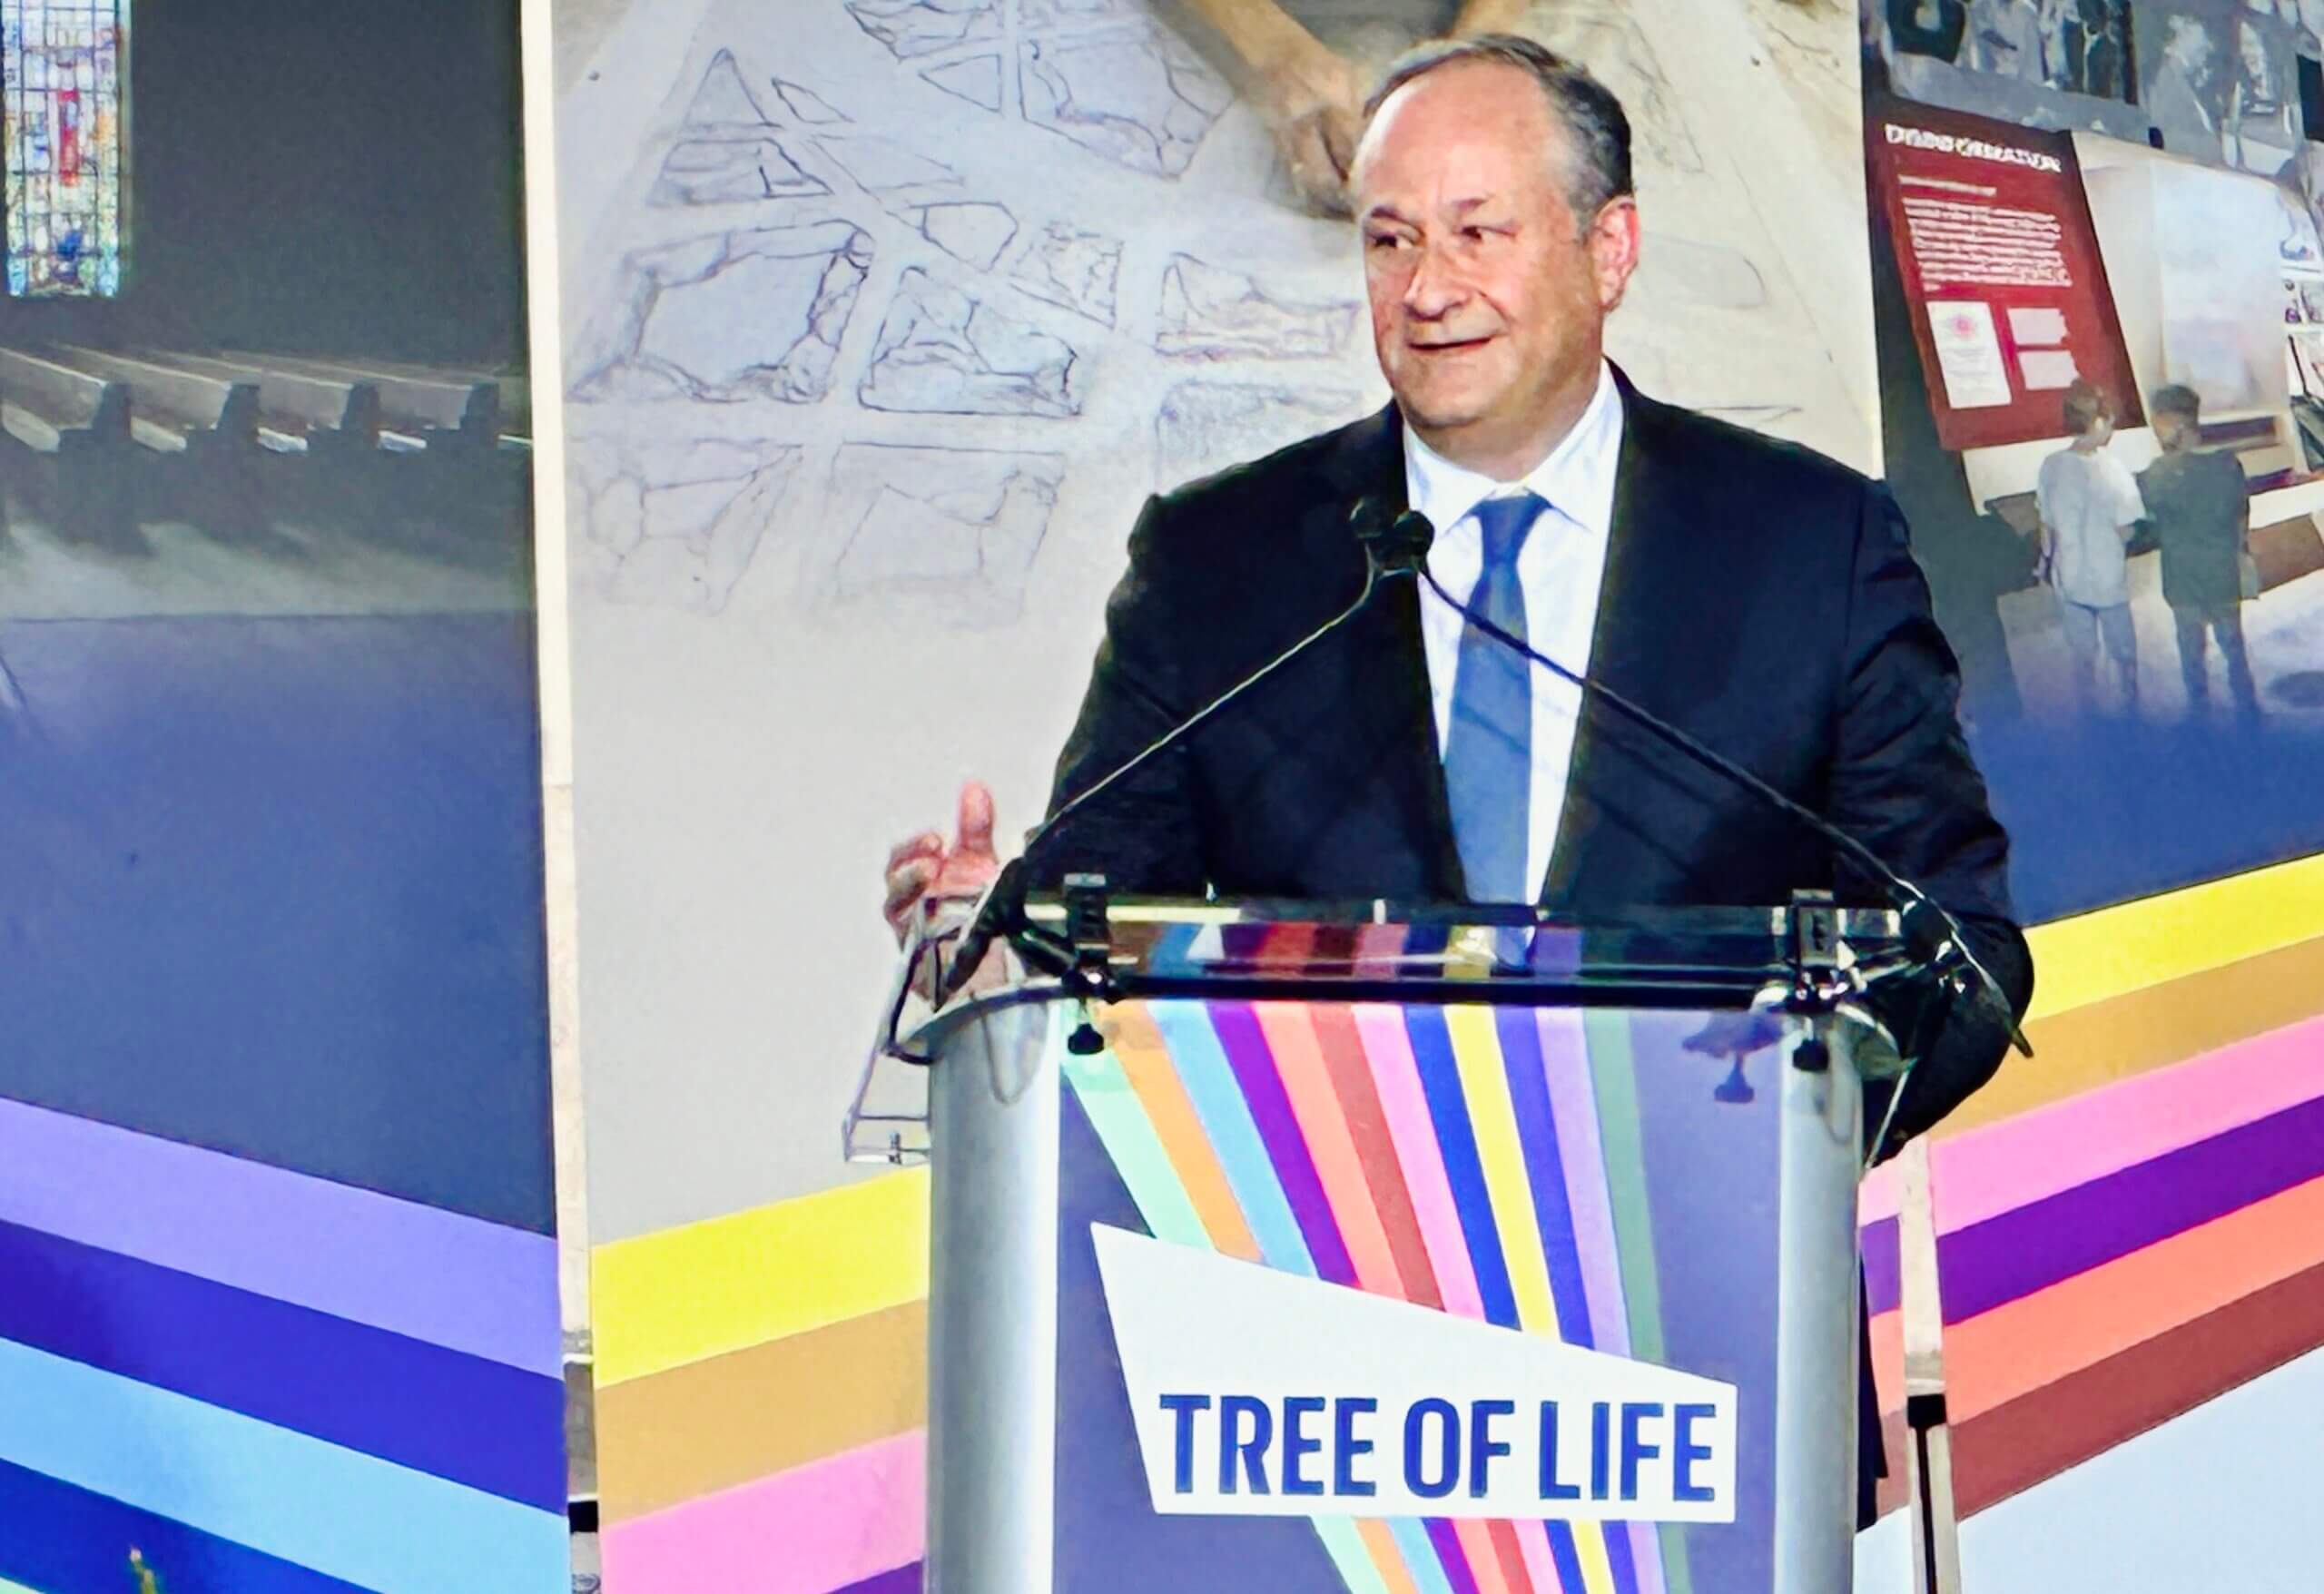 Doug Emhoff, the second gentleman of the United States, speaks at a groundbreaking ceremony for a new building on the site of the Tree of Life shooting in Pittsburgh.